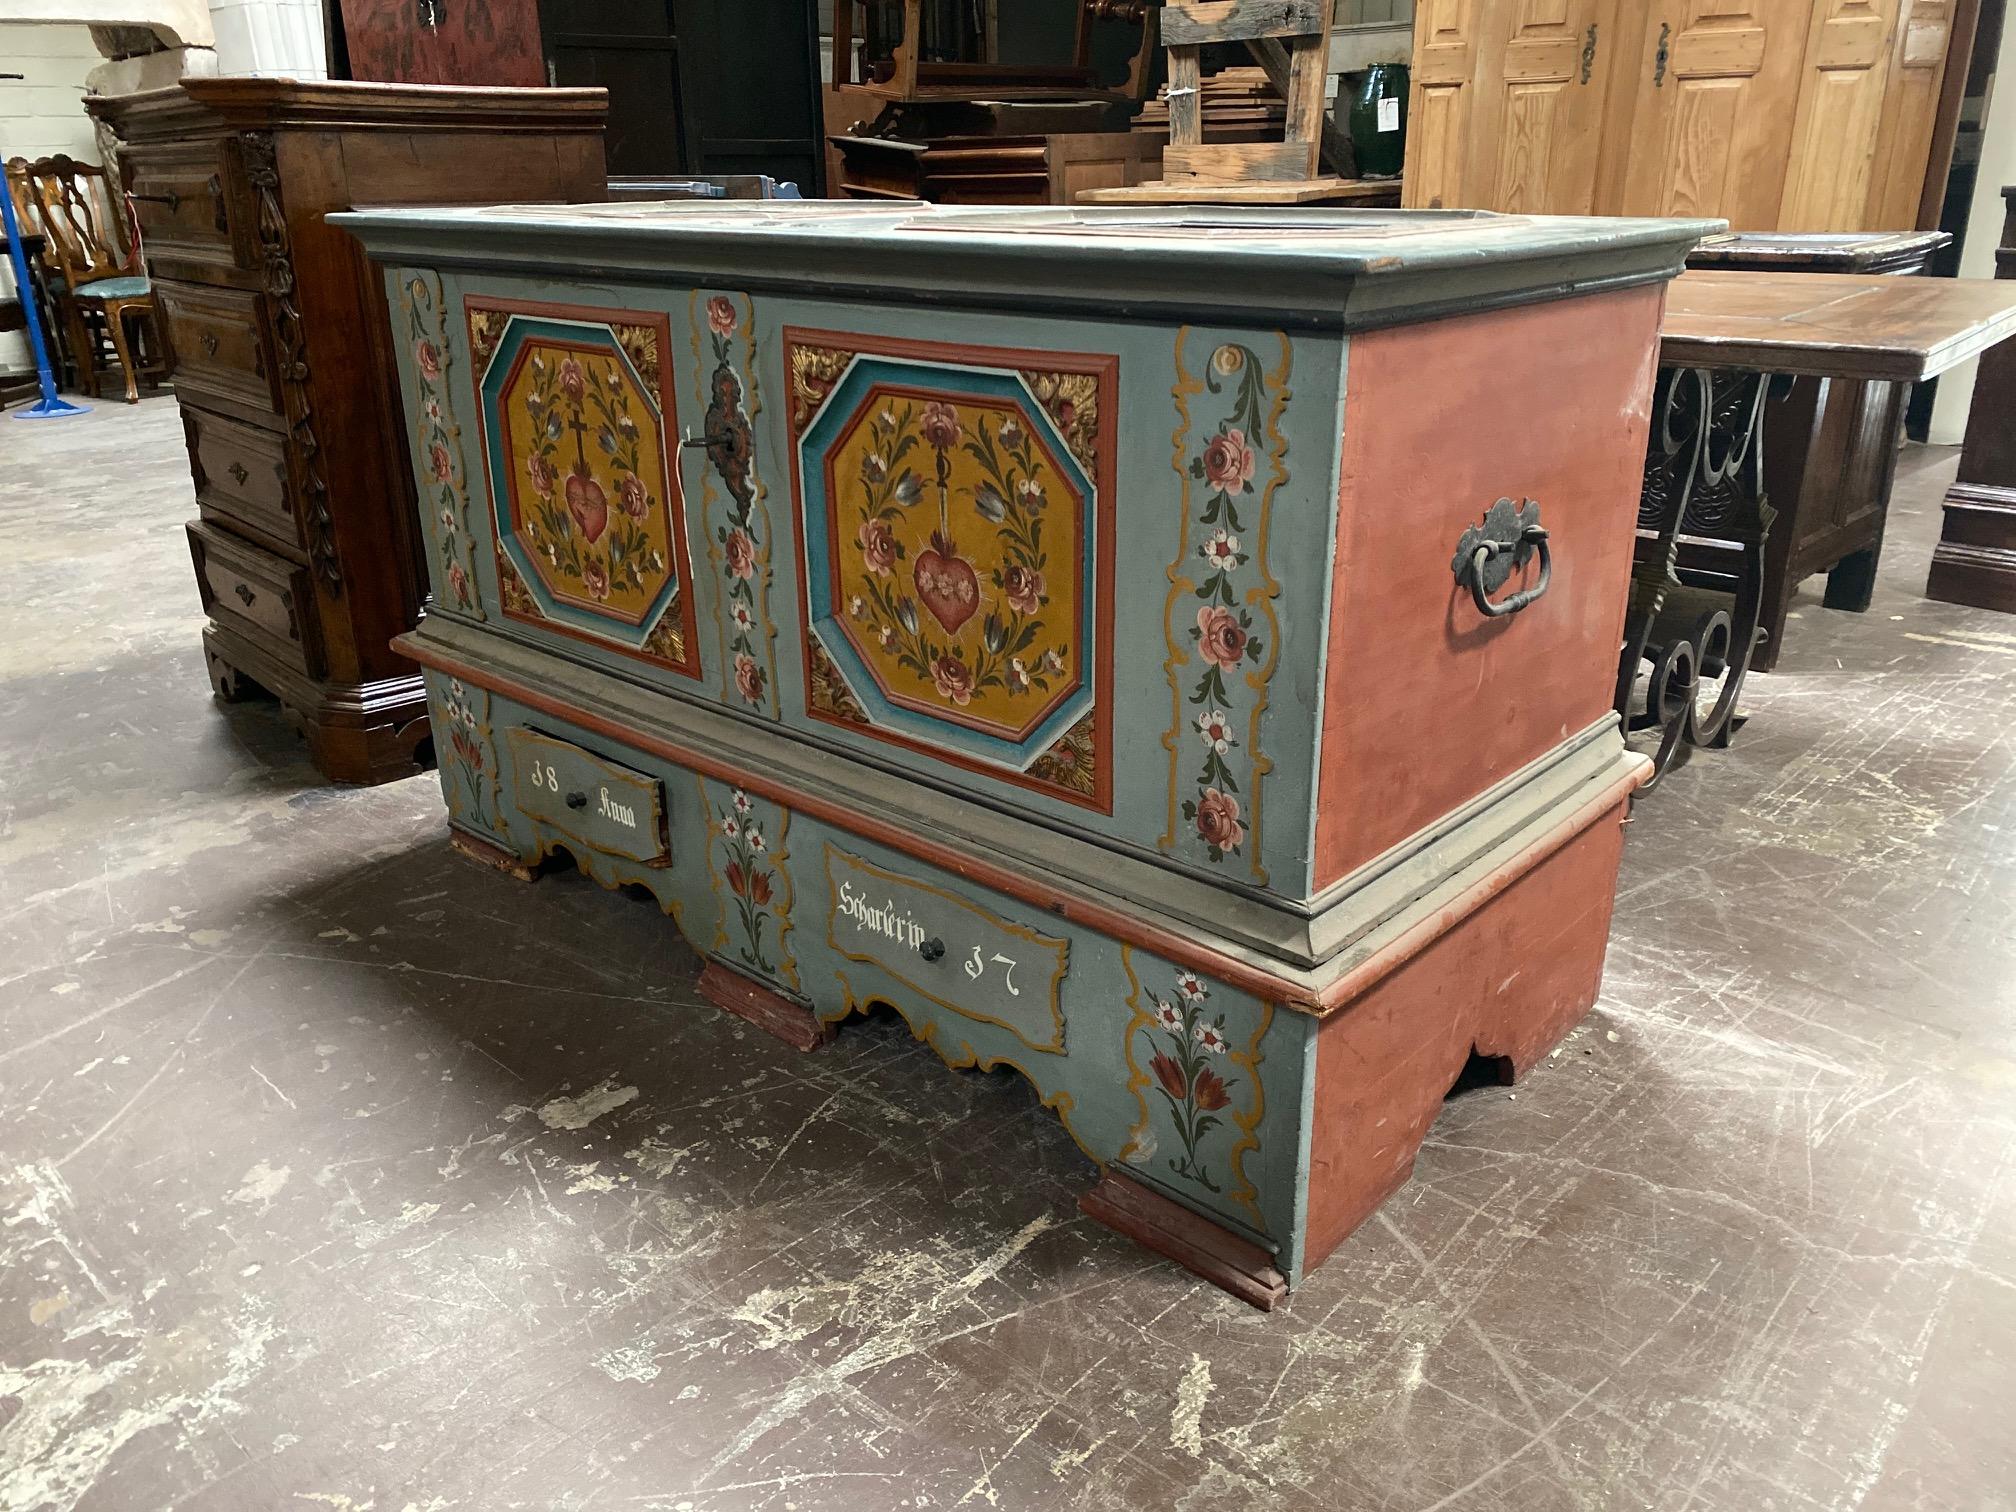 This large, painted chest originates from Switzerland, circa 1830s. It features a vibrant design and well preserved interior with drawers and pockets.

Measurements: 27